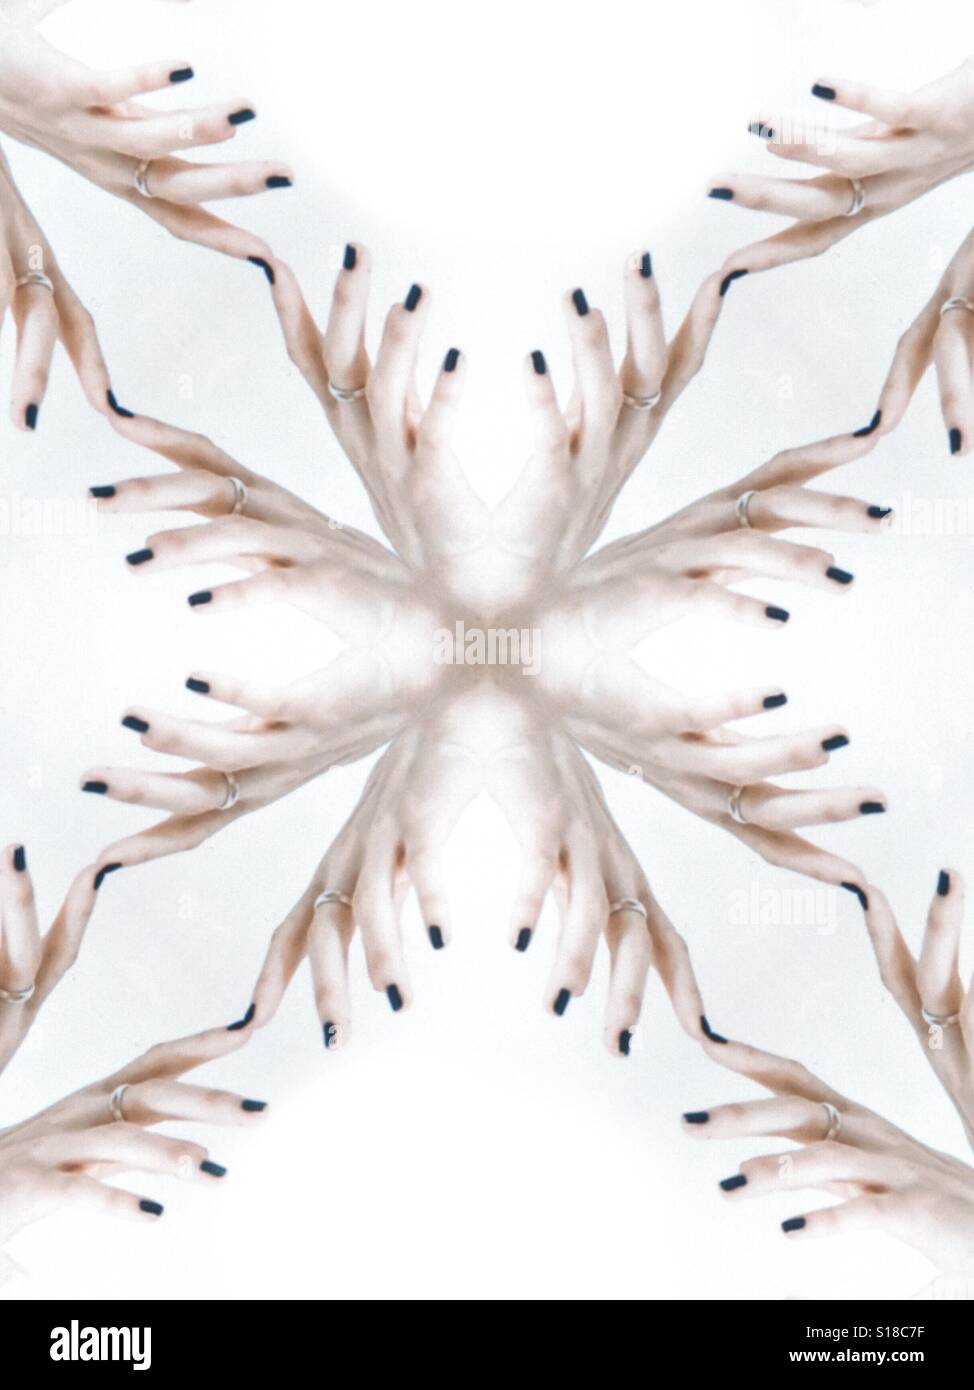 An abstract conceptual image of a repetitive design. Created from female fingers against a white background Stock Photo